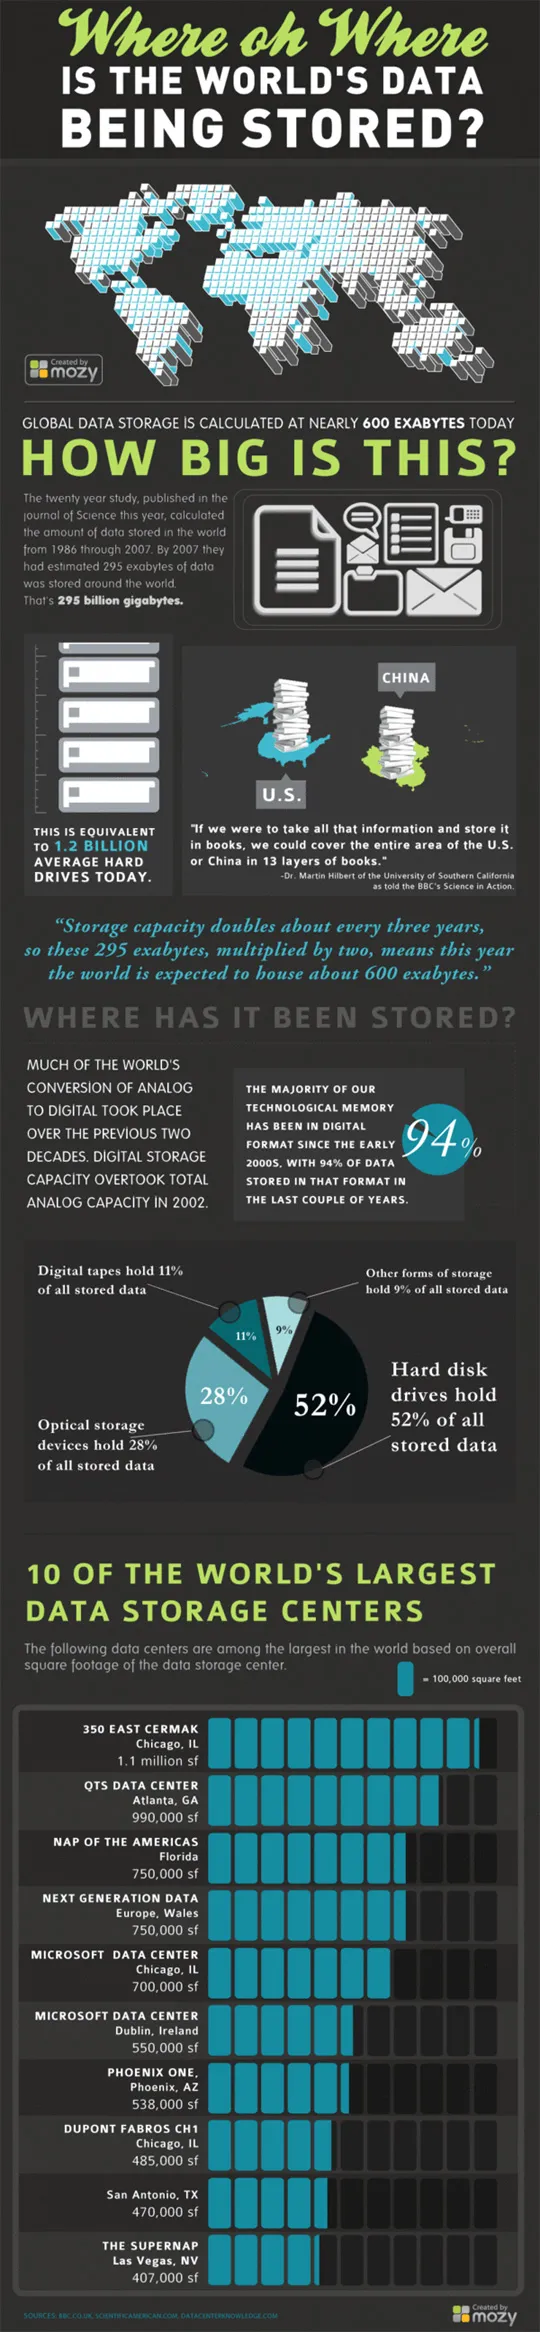 Where Oh Where: Current State Of World's Data Storage (Infographic) 3